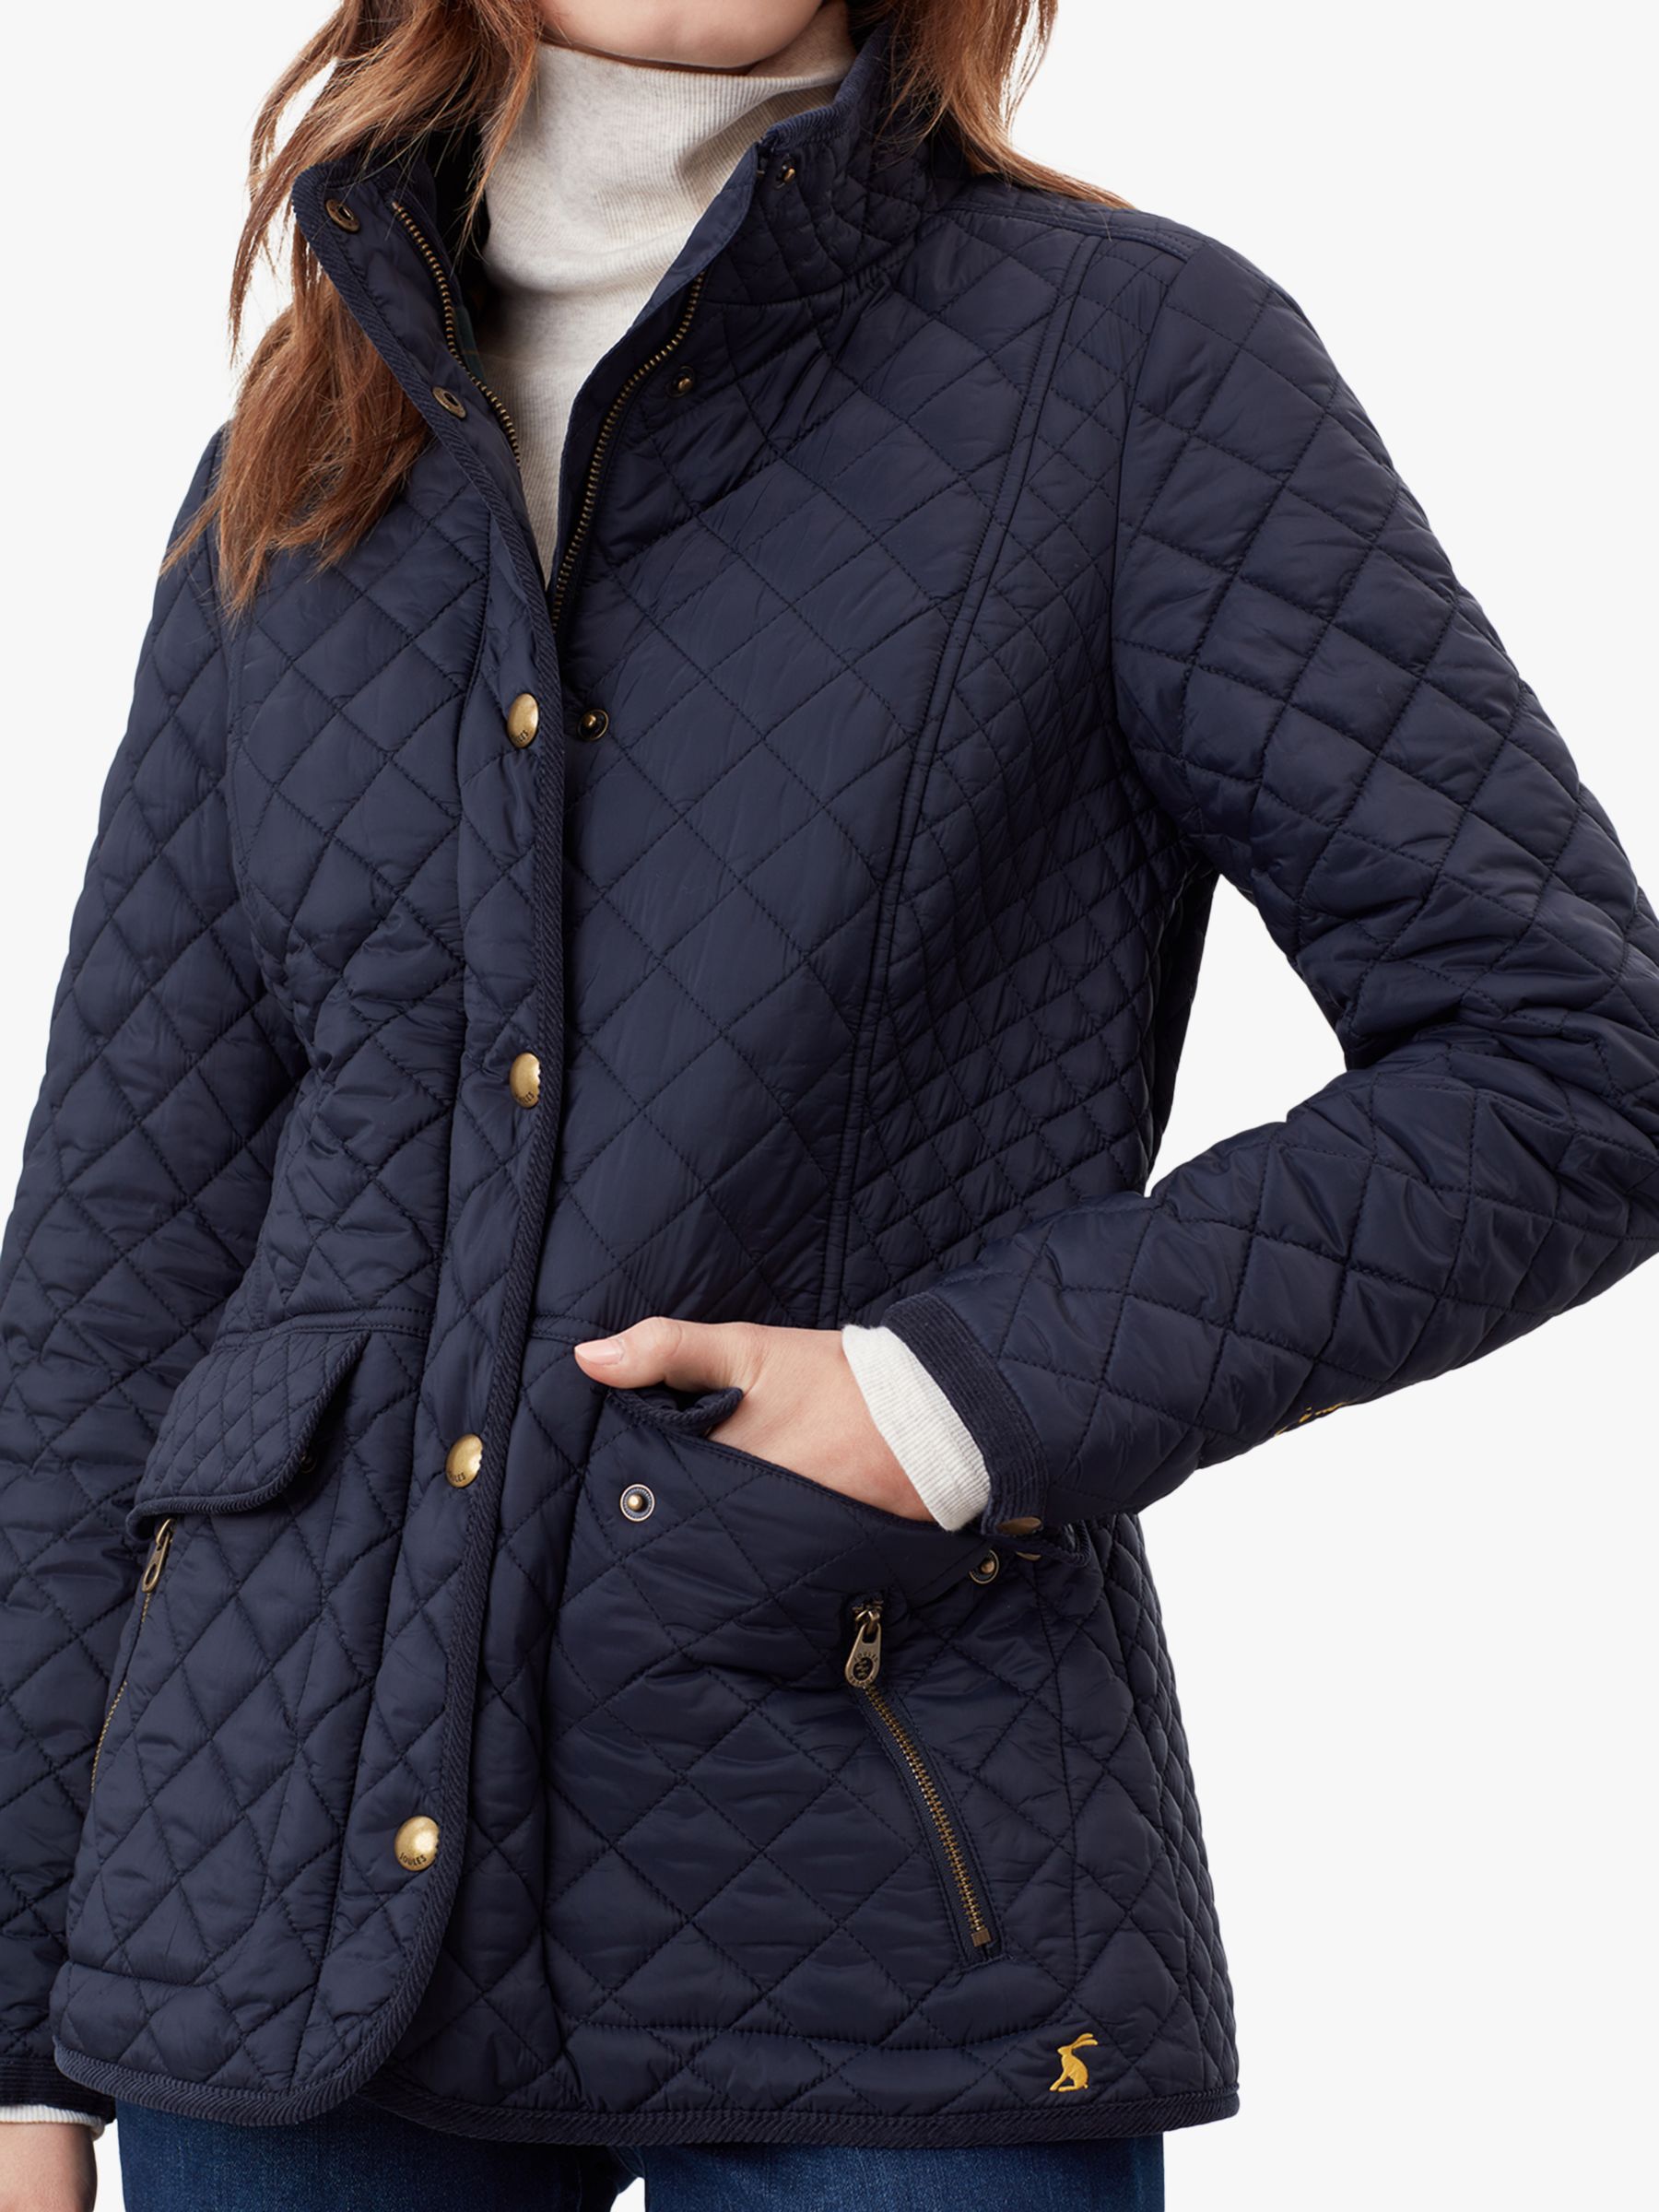 Joules Newdale Quilted Jacket, Marine Navy at John Lewis & Partners